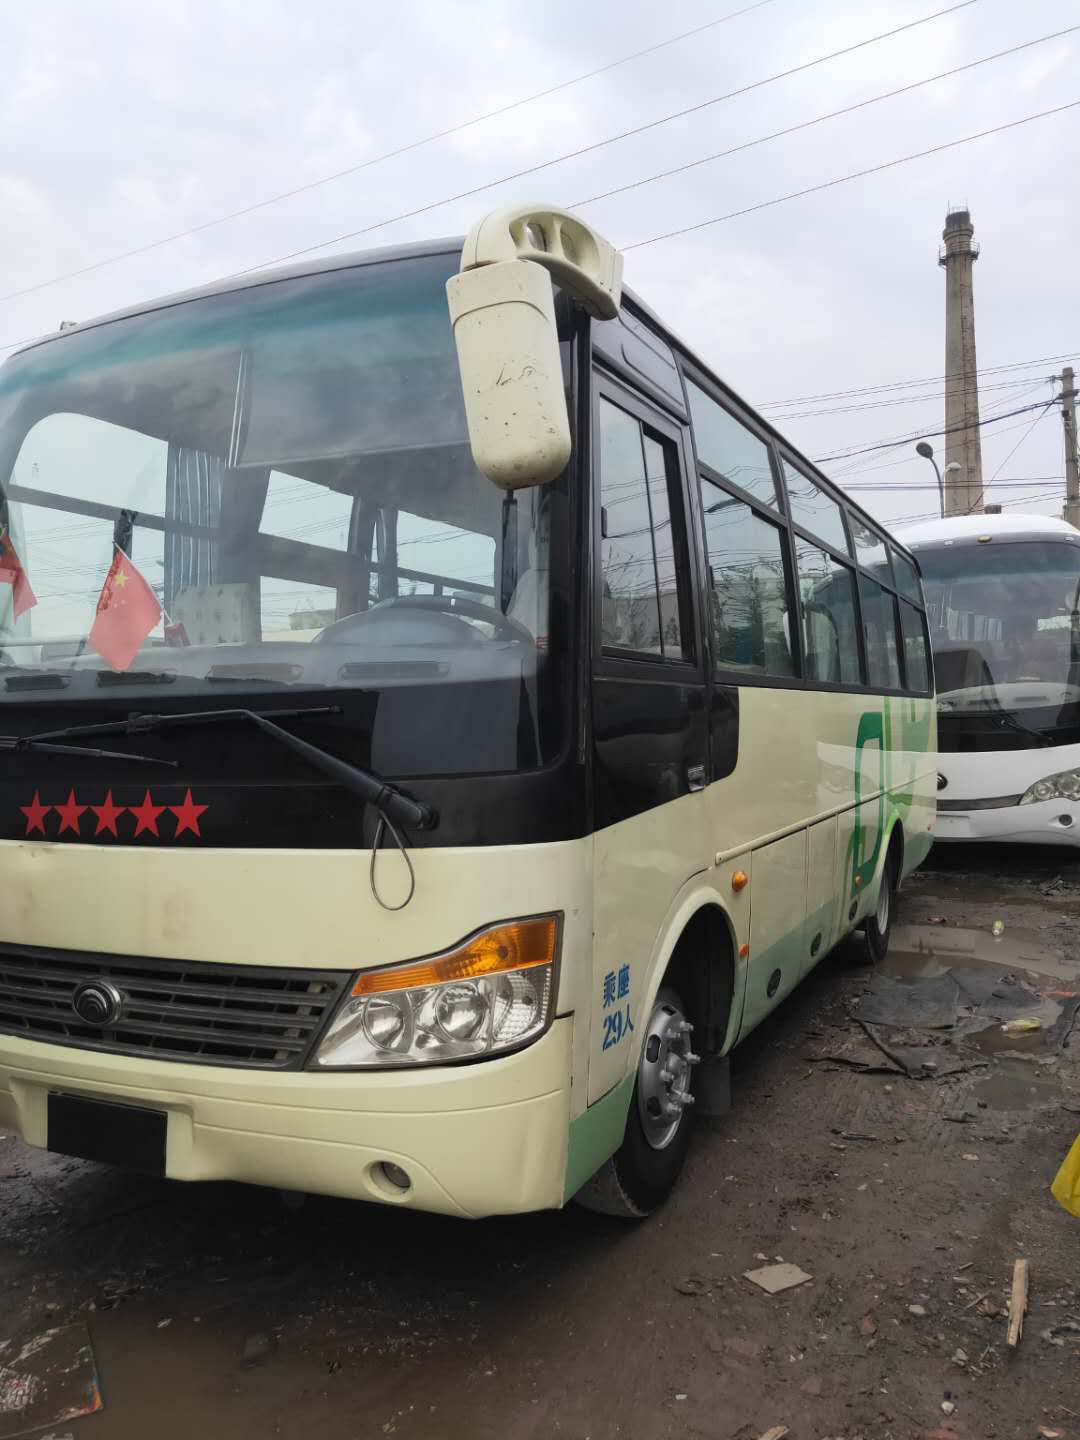 Quality used yutong bus 2015 year China made yutong 29 seats/50 seats big bus for sale in China for sale